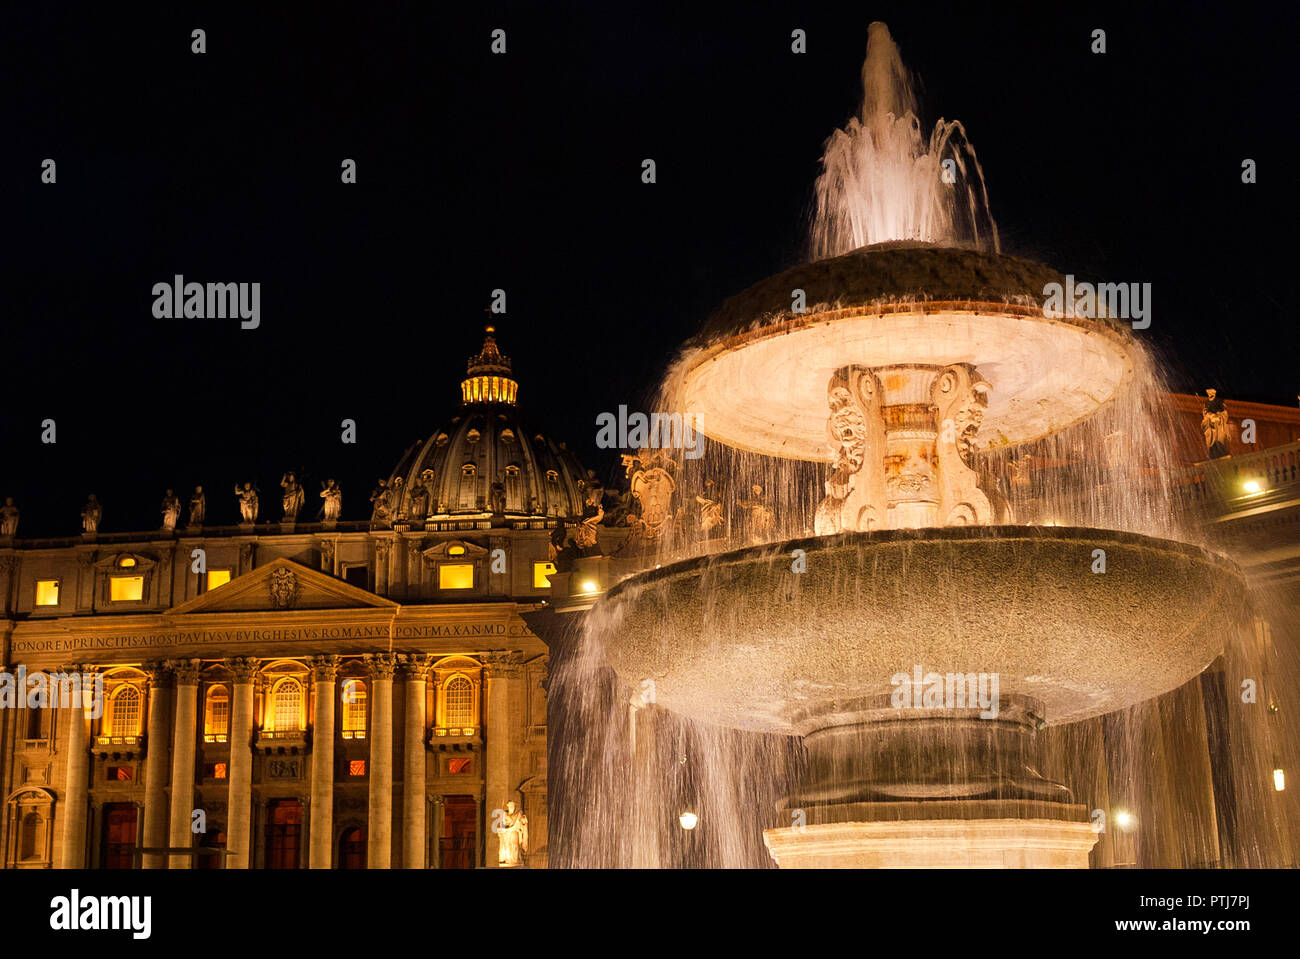 Wonderful Saint Peter Basilica and old fountain lit up at night Stock Photo